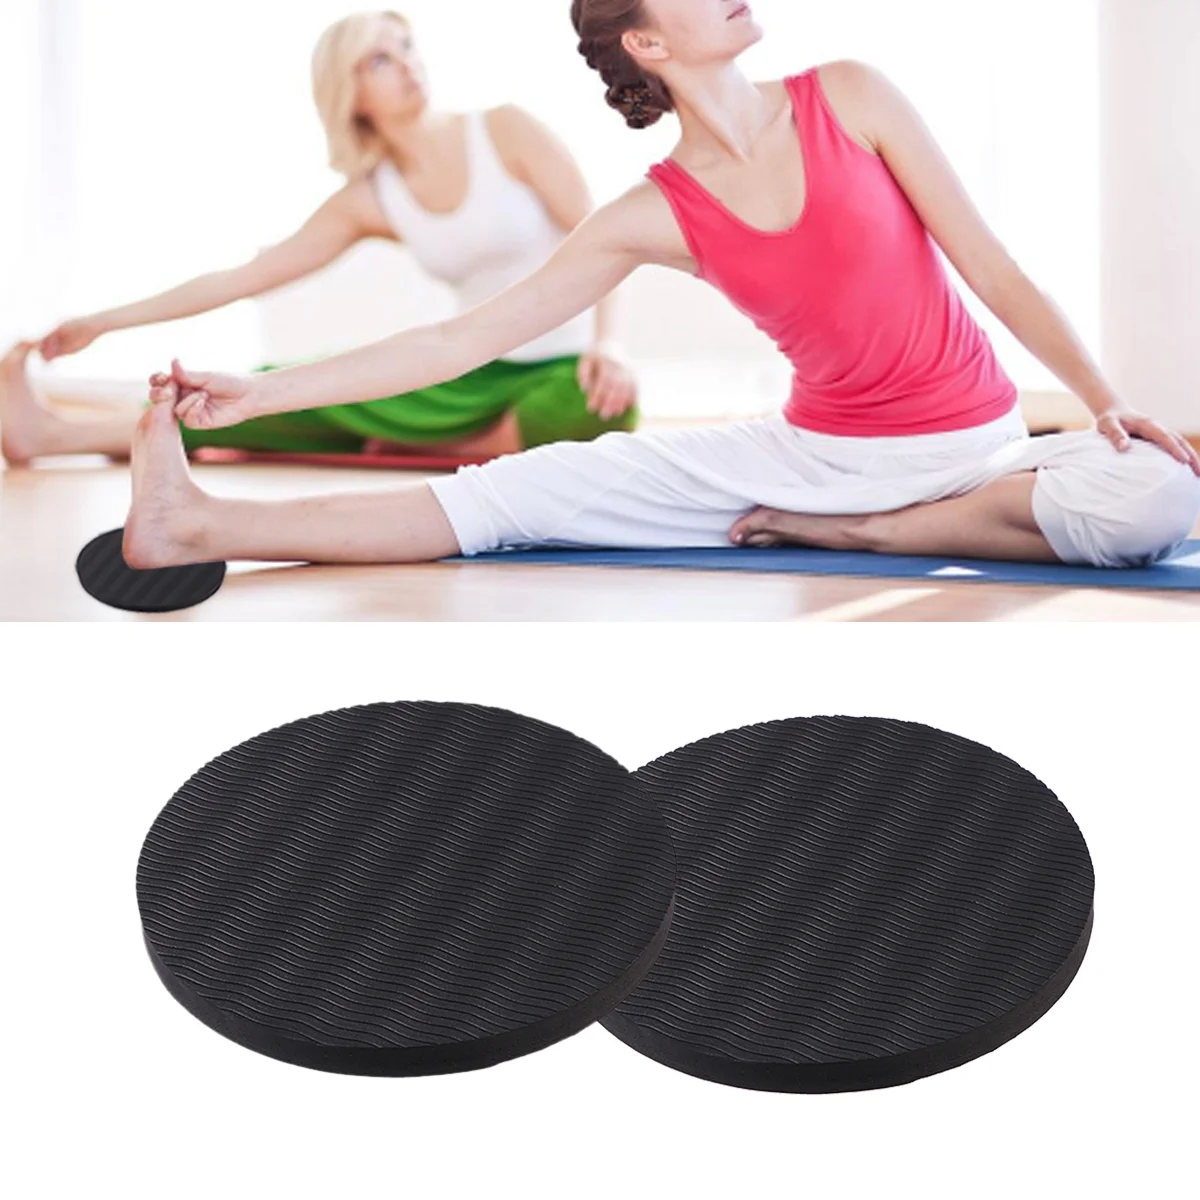 

Yoga Pad Knee Cushion Support Mat Workout Pilates Pads Exercise Fitness Tpe Elbows Thick Round Wrists Hand Kneeling Mats Knees